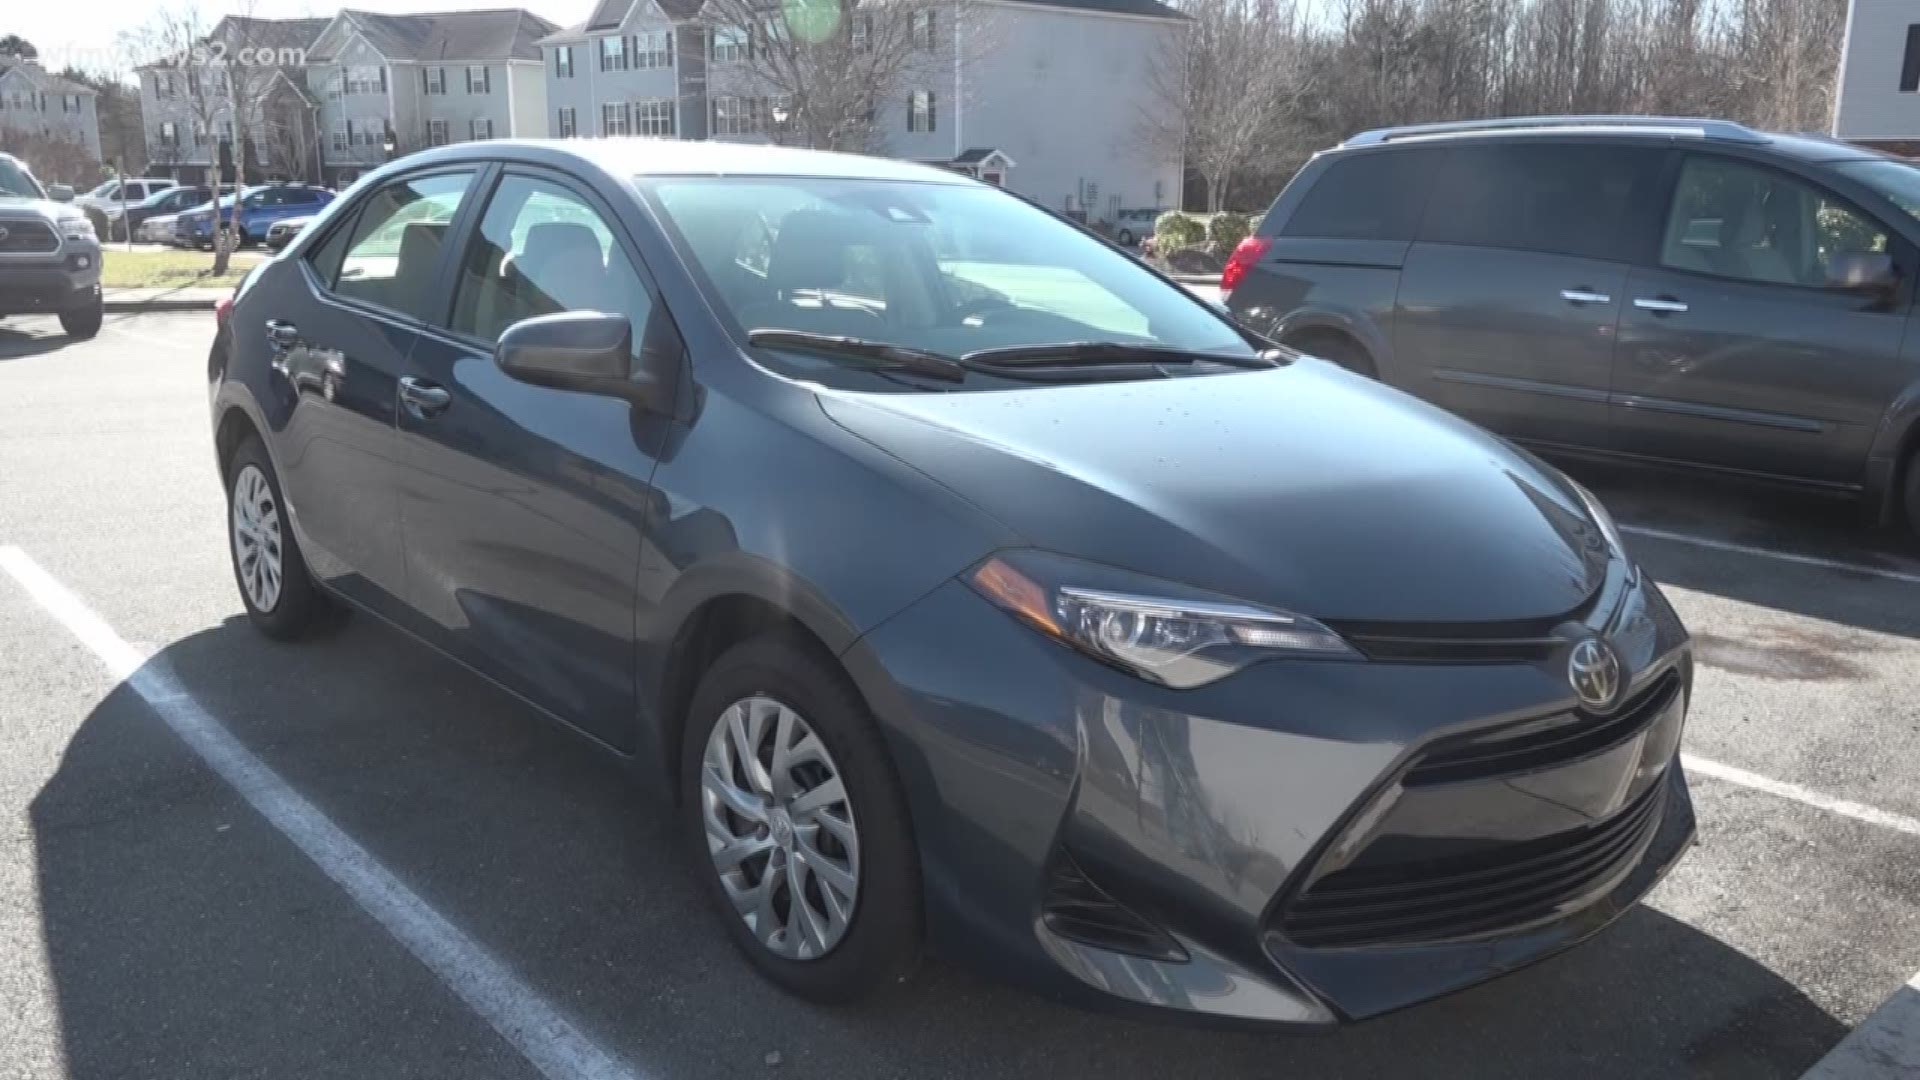 Linwood Austin liked his Toyota Corolla so much his leased another one three years later. Problem is, he didn't pay off the old one and the extra charges were huge.